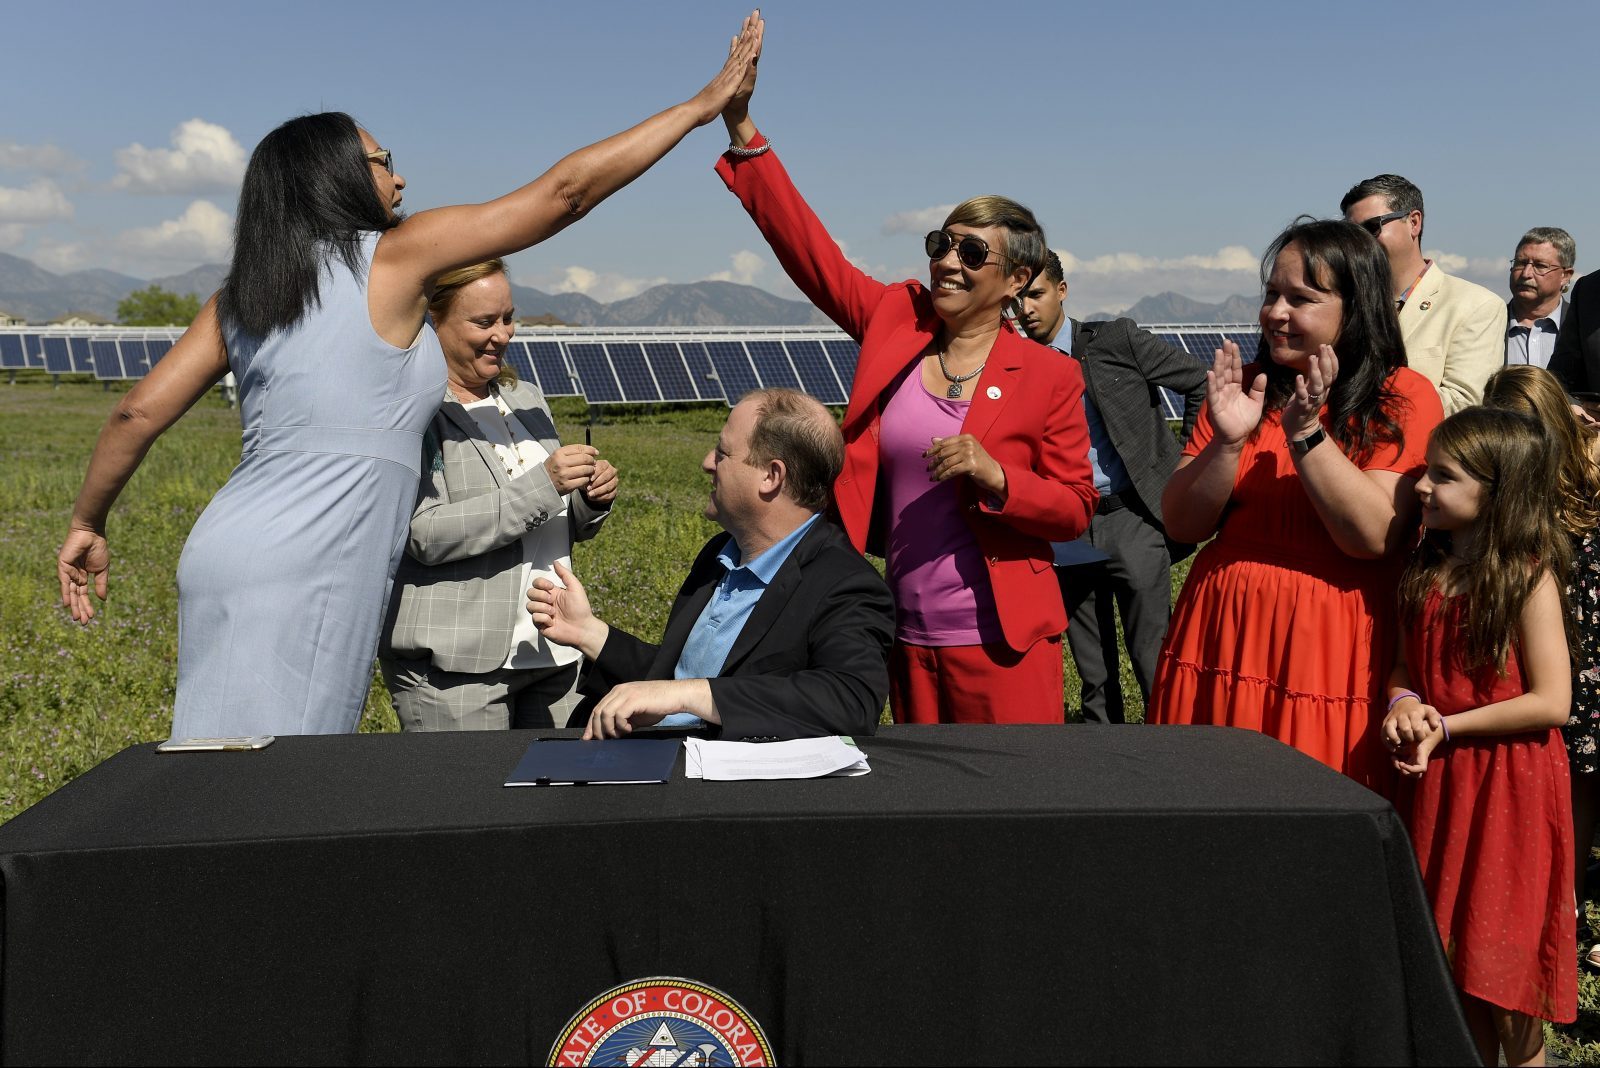 Representative Dominique Jackson and Senator Angela Williams High five after Governor of Colorado Jared Polis signs a climate action bill into law.